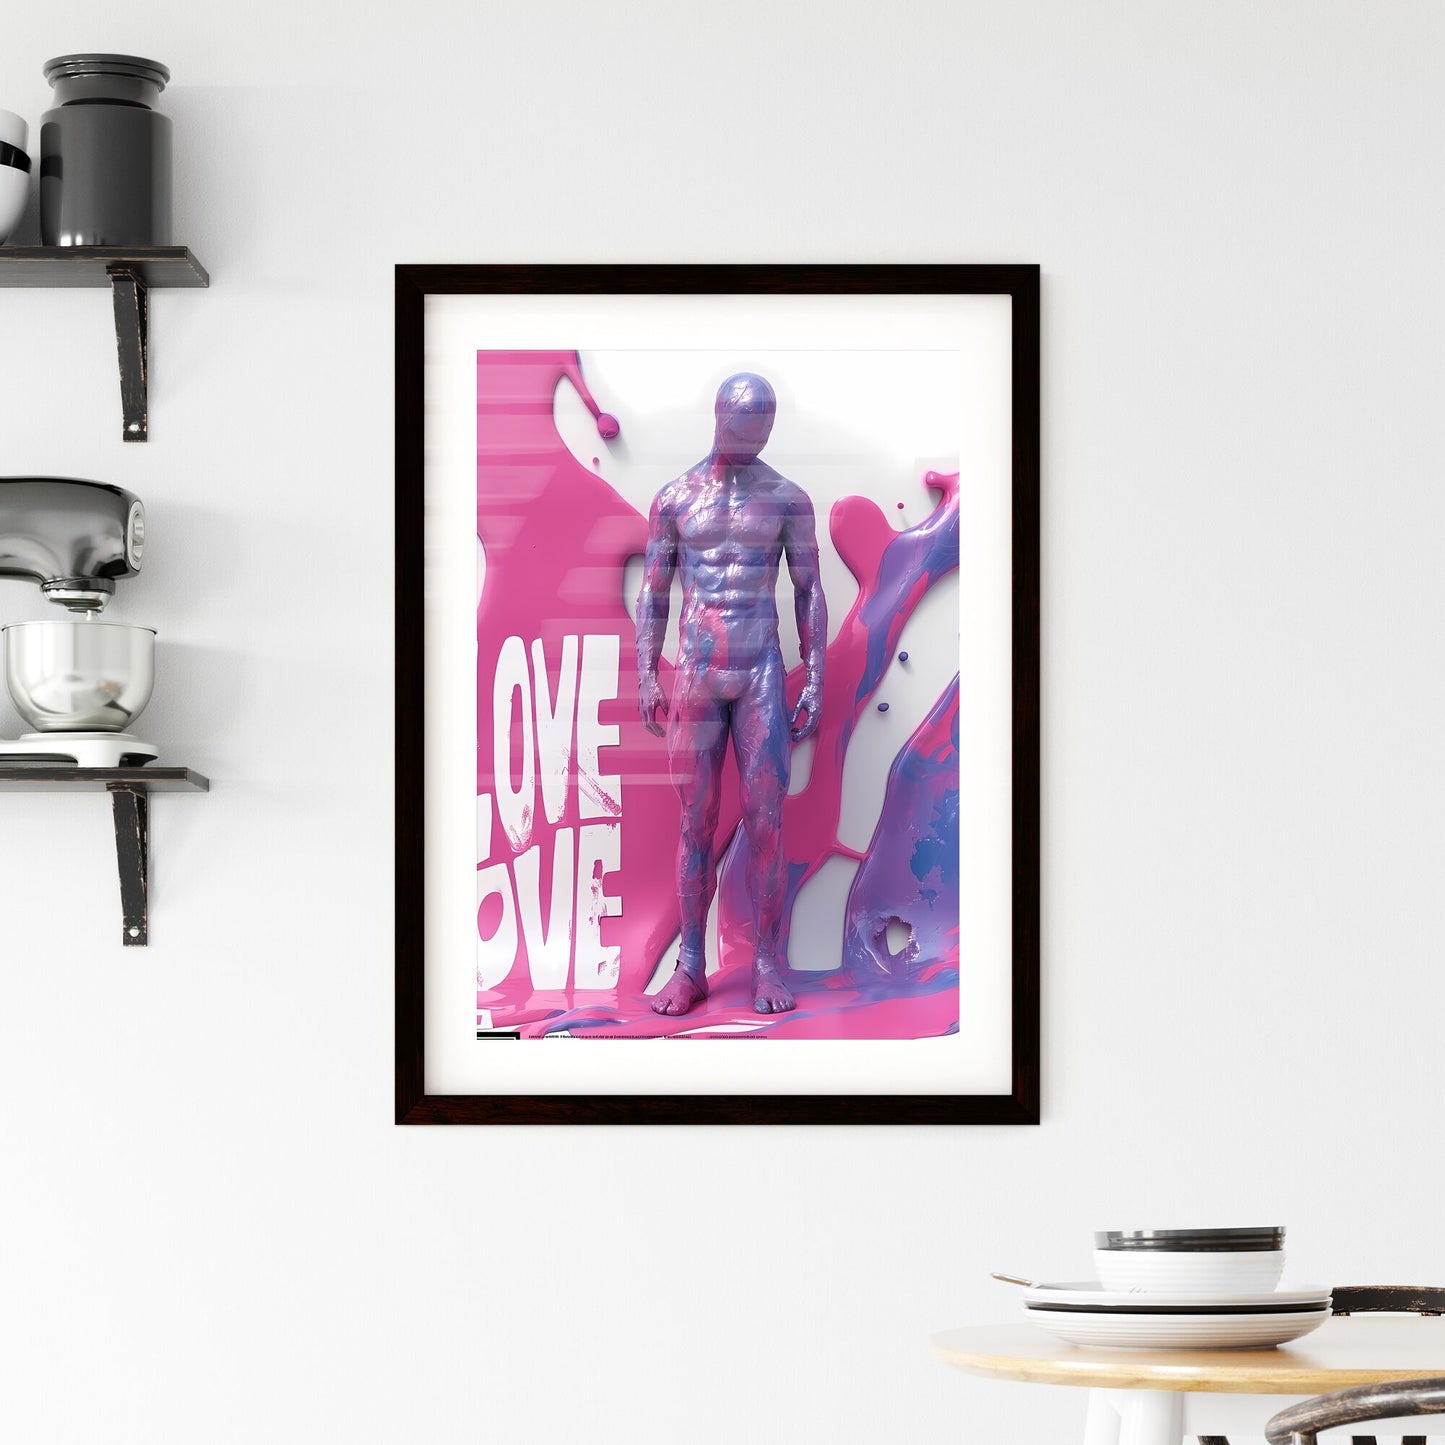 LOVE isolated - Art print of a statue of a man covered in paint Default Title